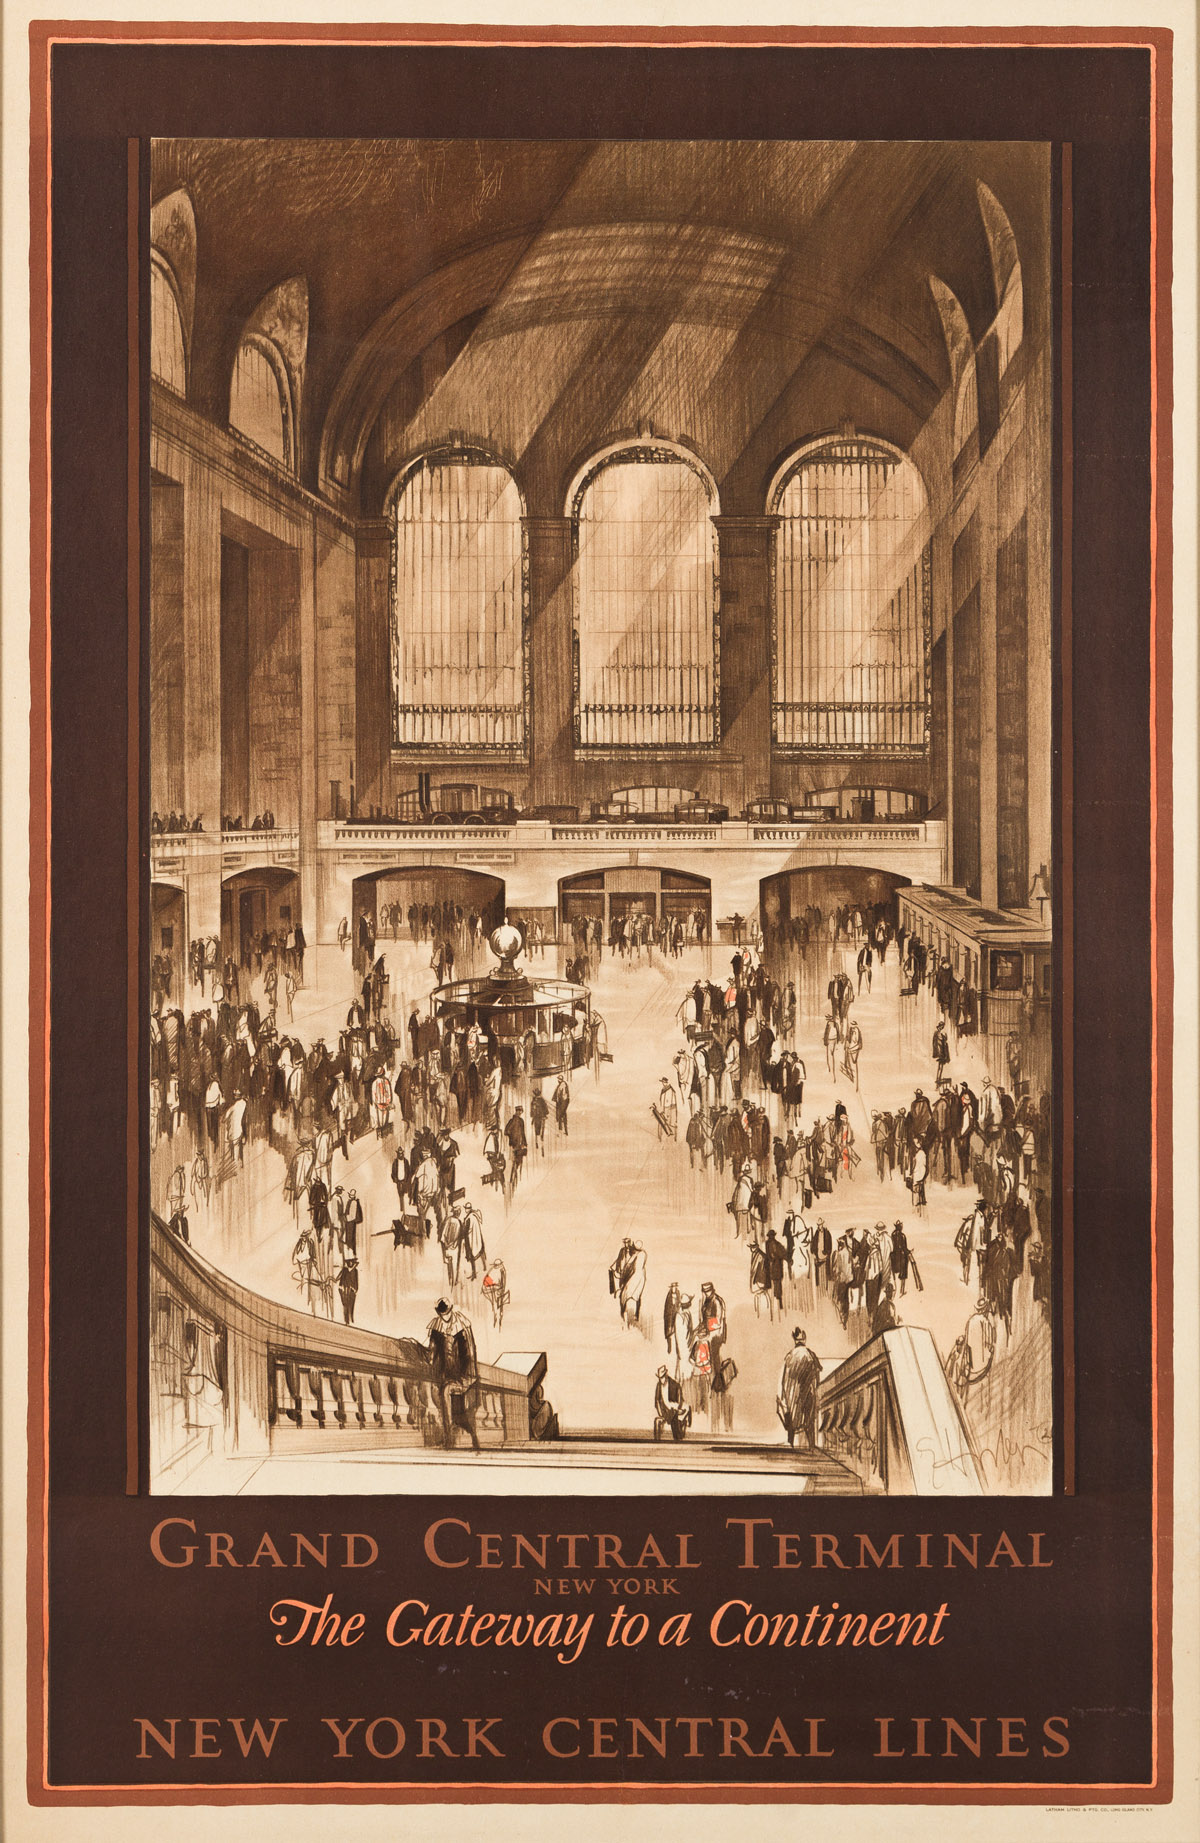 EARL HORTER (1883-1940).  GRAND CENTRAL TERMINAL / THE GATEWAY TO A CONTINENT. 1927. 41x27 inches, 104x68½ cm. Latham Litho. & Ptg. Co.